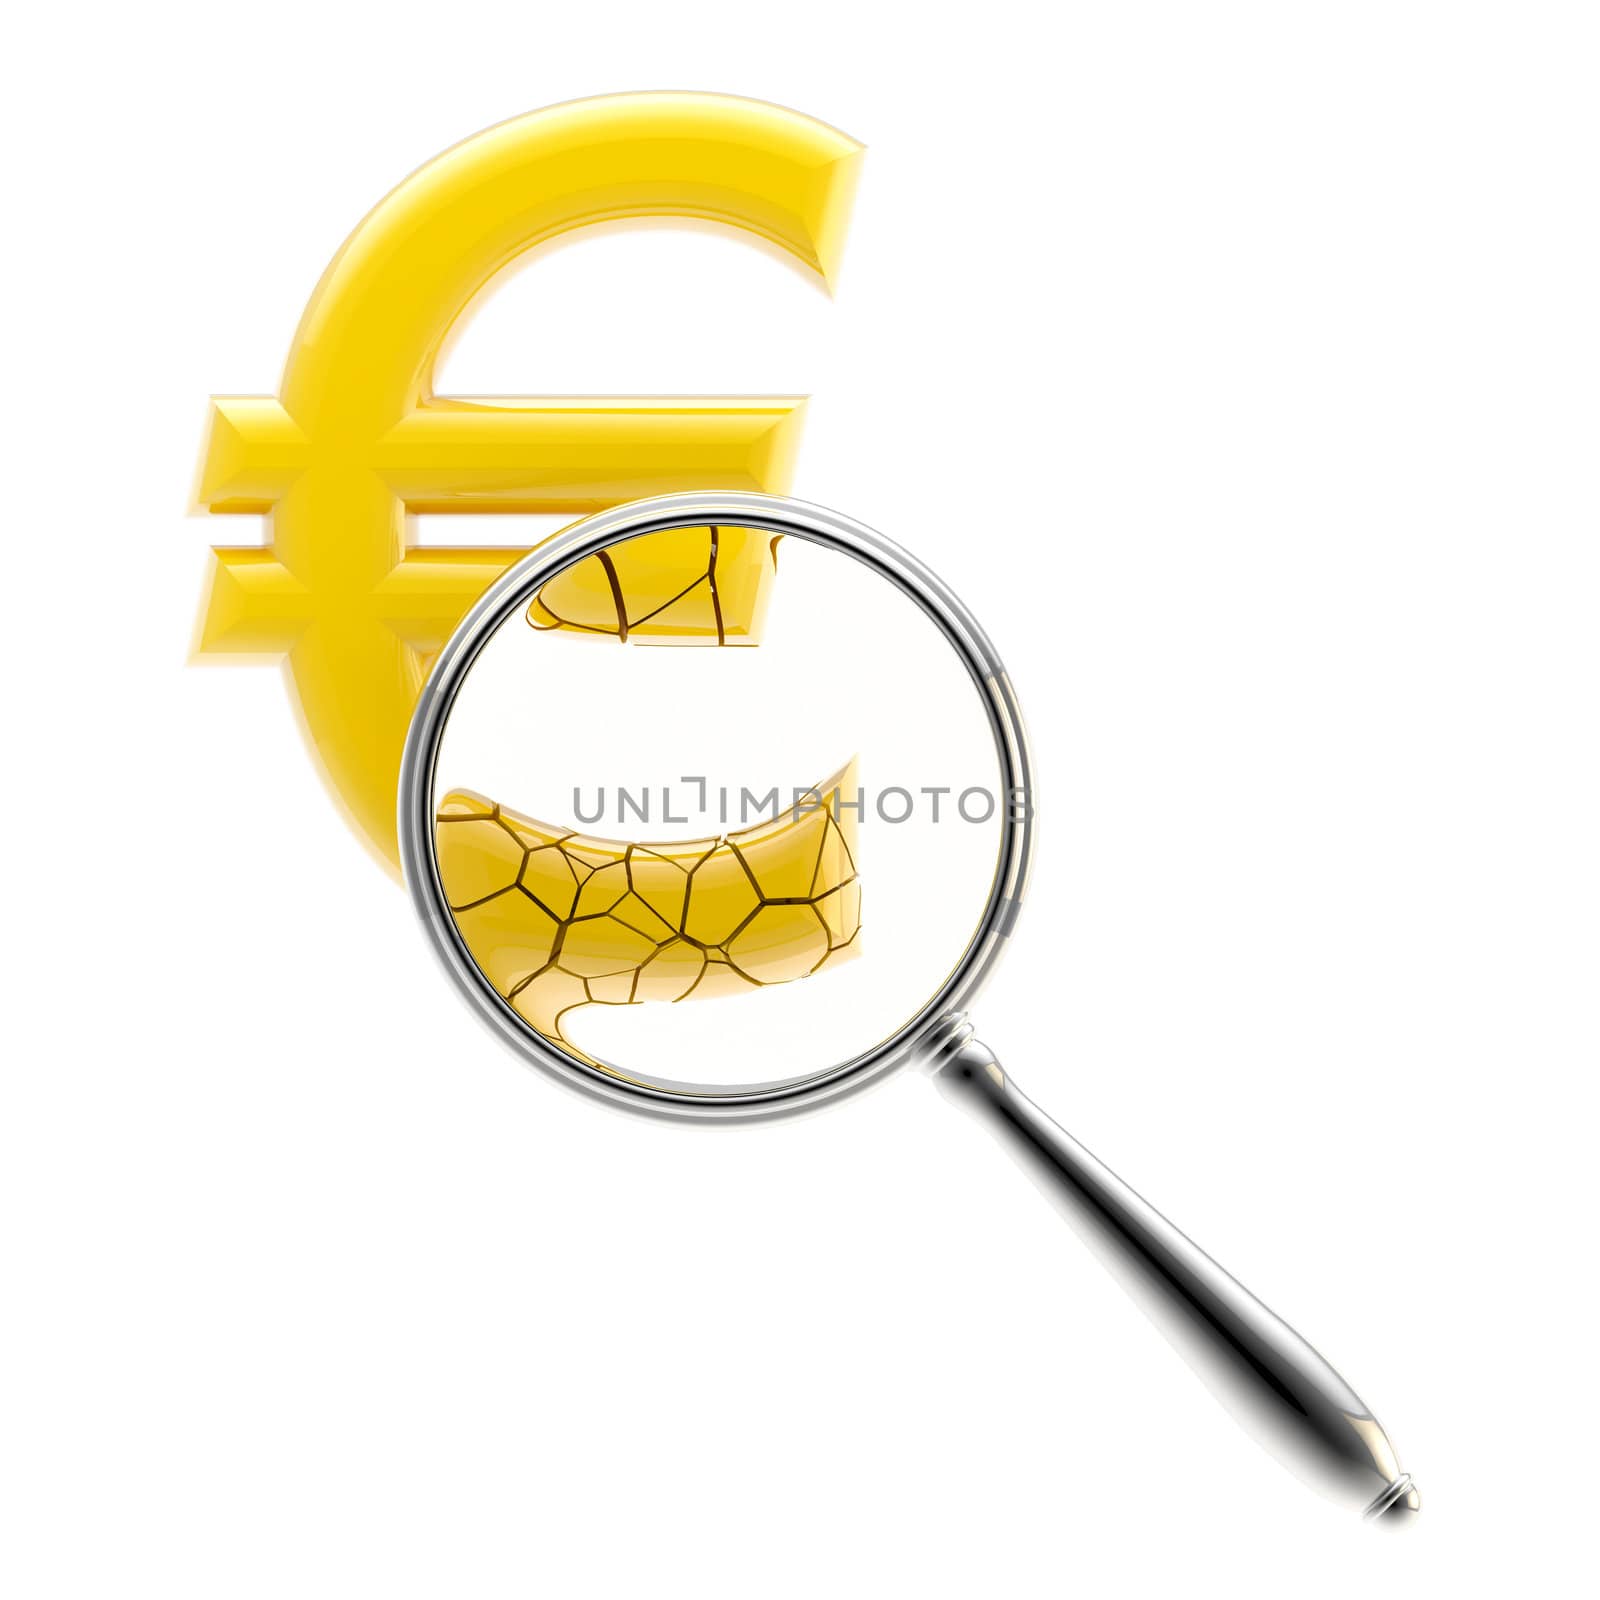 Crashing euro sign under the magnifier by nbvf